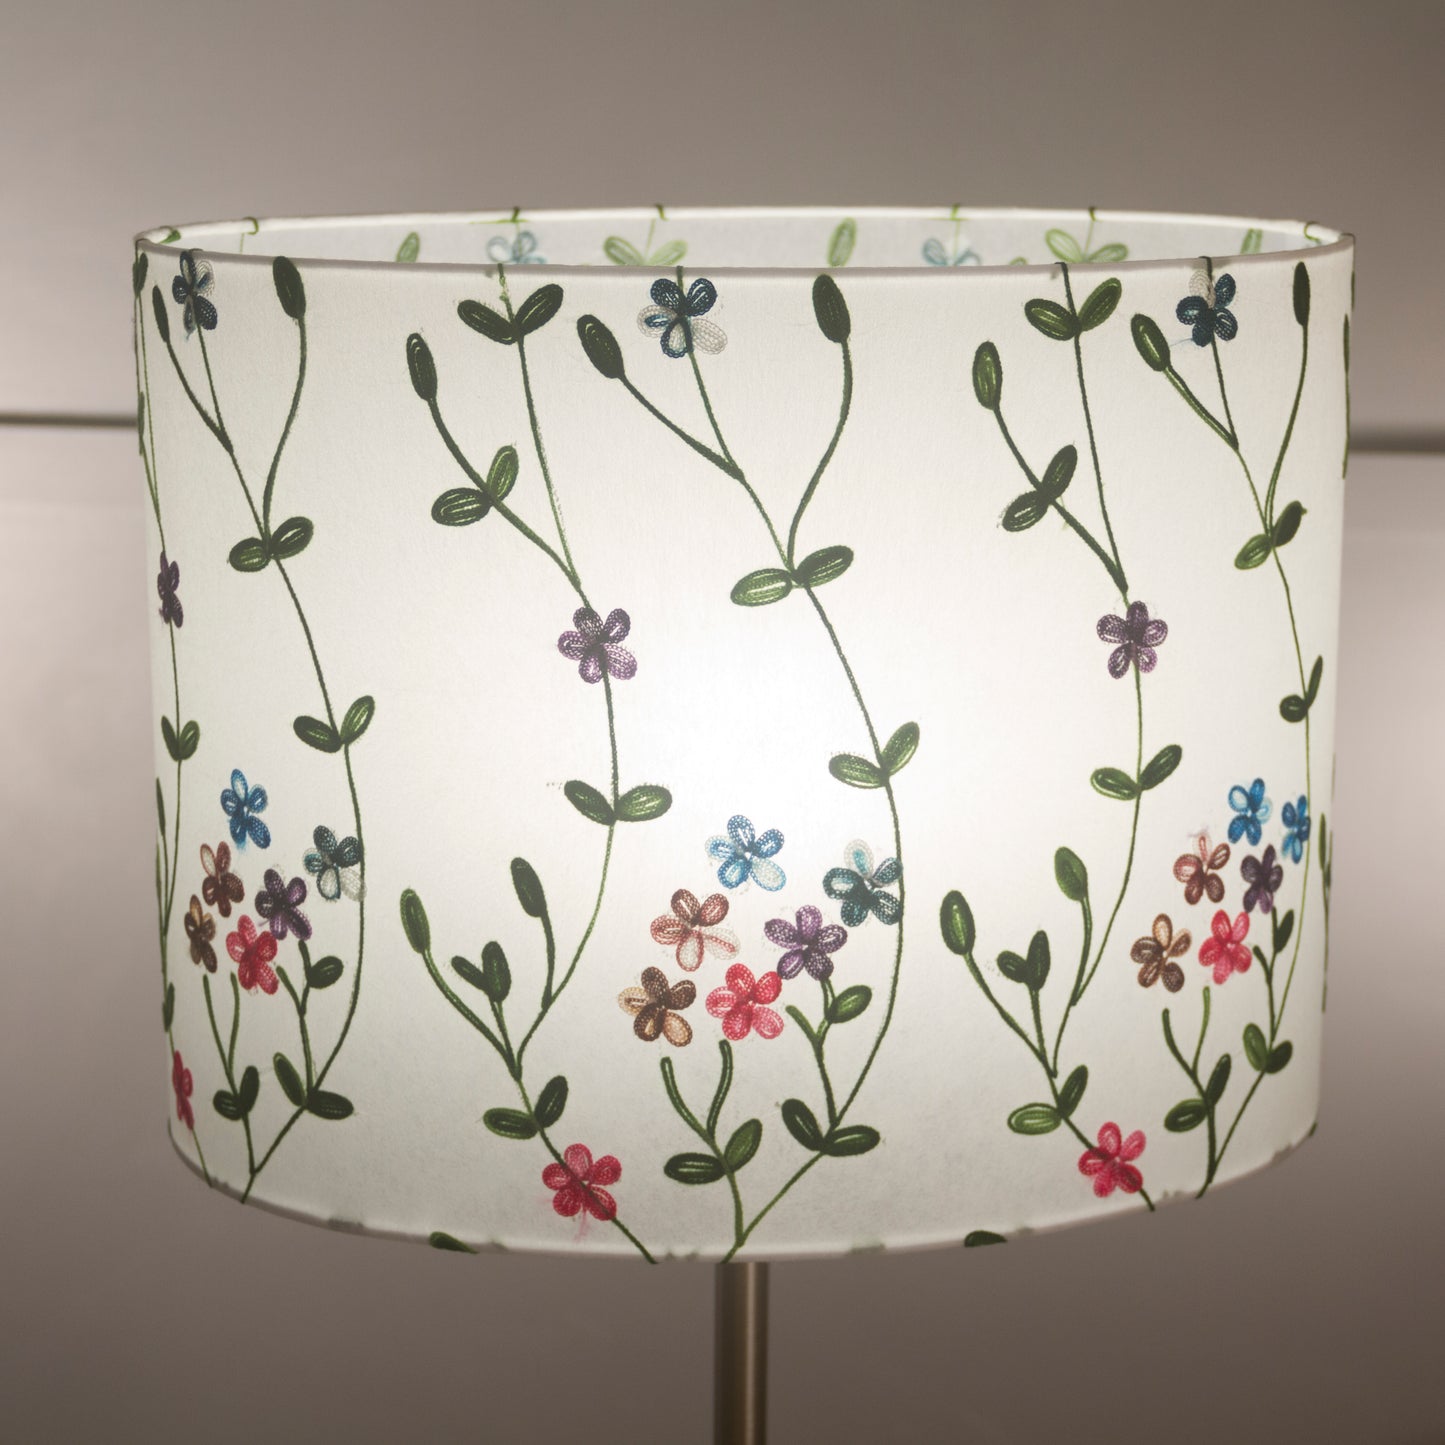 Oval Lamp Shade - P43 - Embroidered Flowers on White, 40cm(w) x 30cm(h) x 30cm(d)